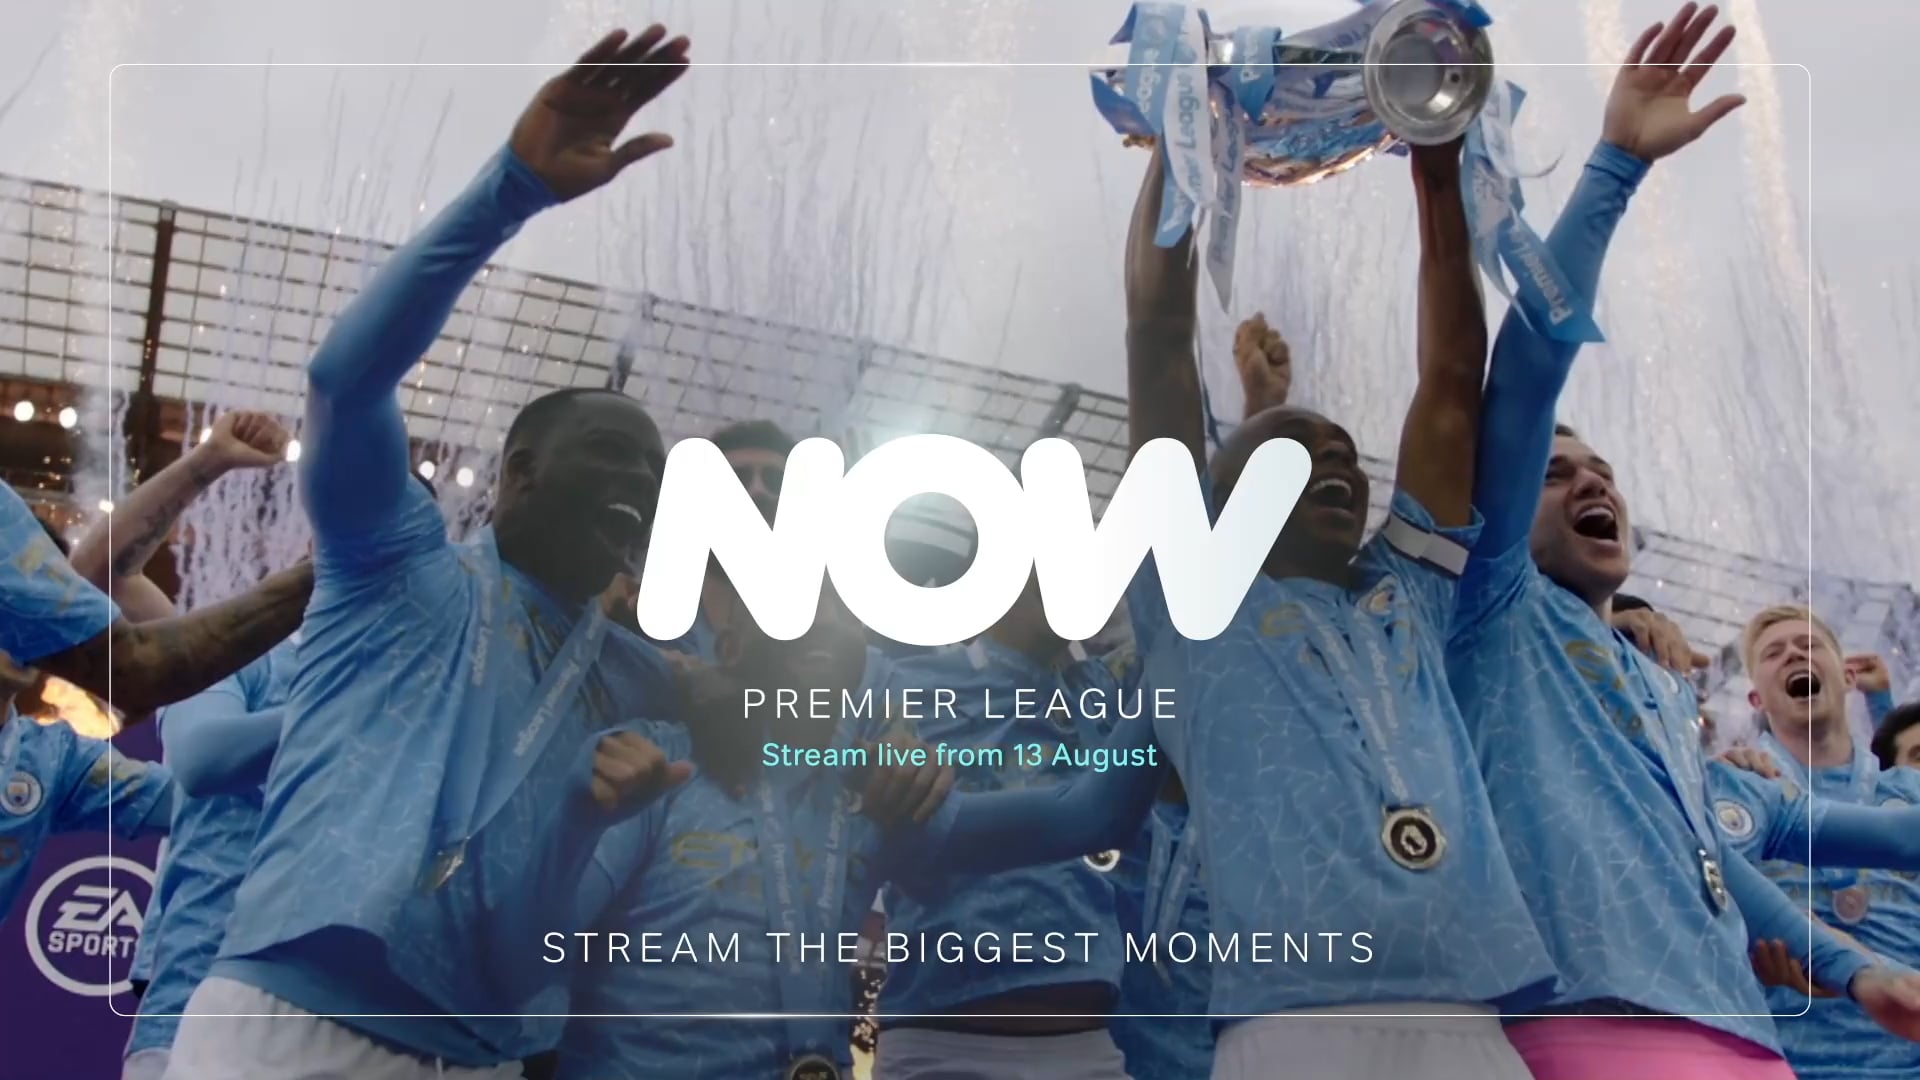 NOW This is the Premier League on Vimeo